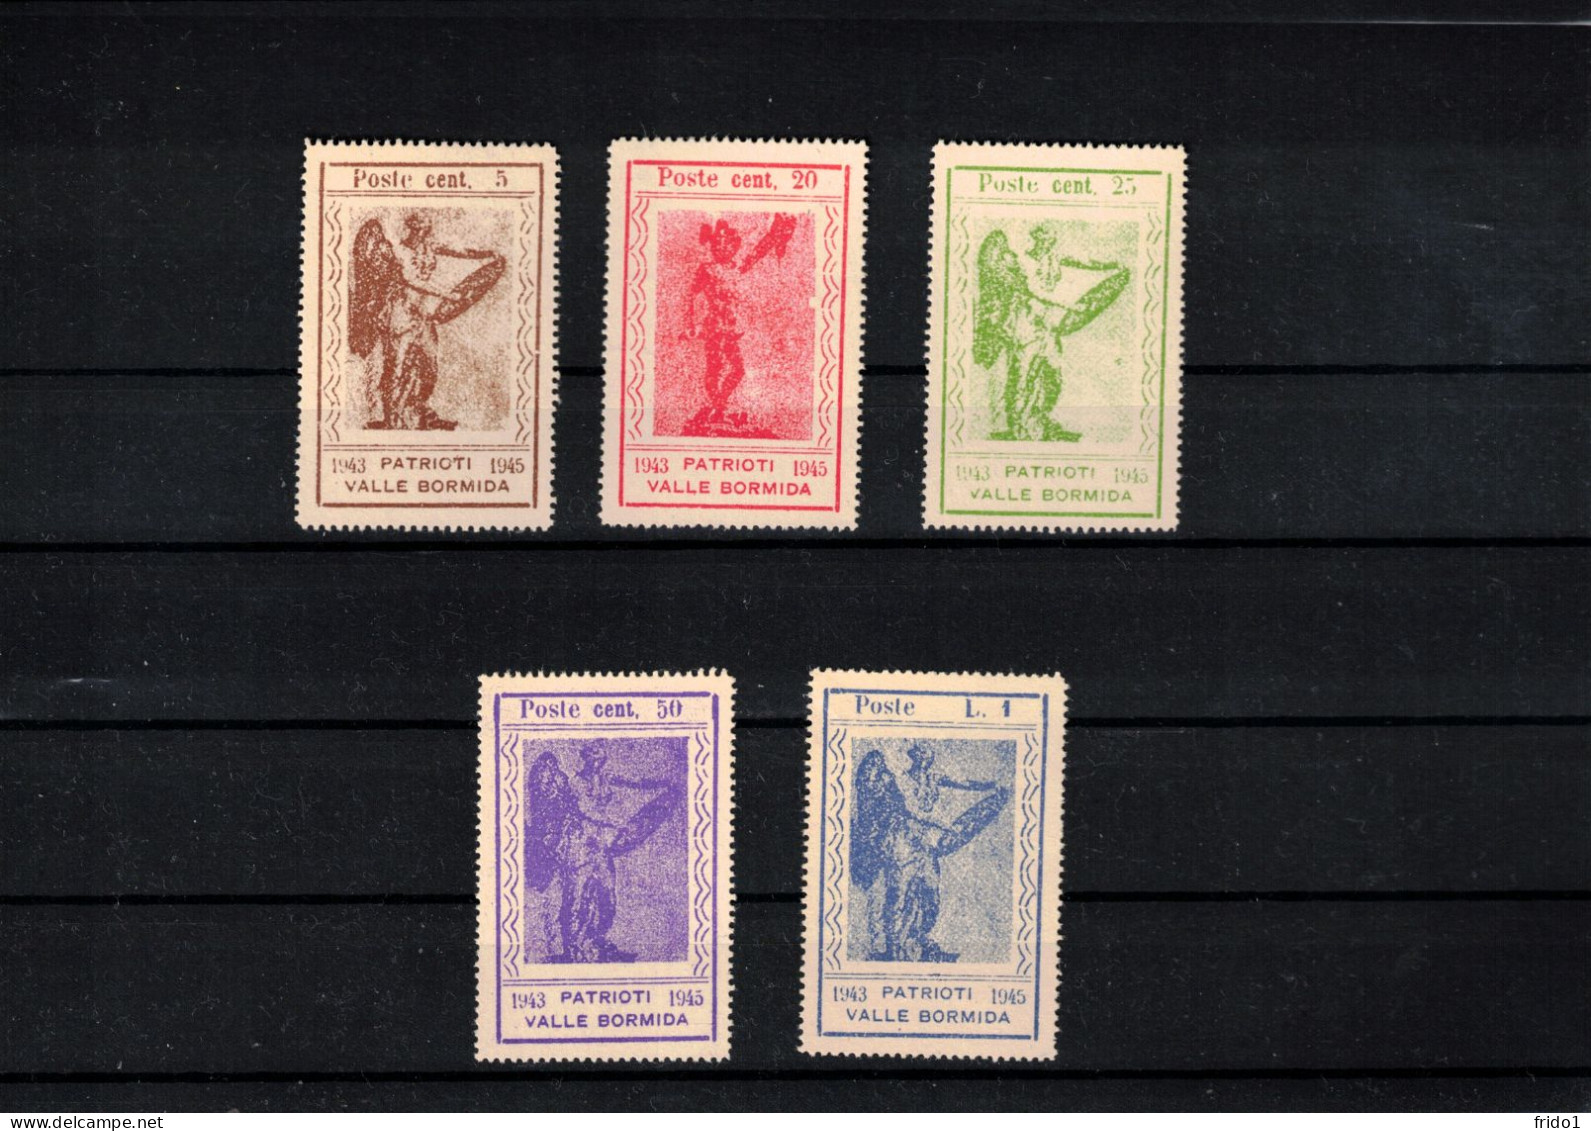 Italy / Italia 1945 Regno D'Italia Valle Bormida Part Of Set Stamps Without Gum As Issued - Neufs